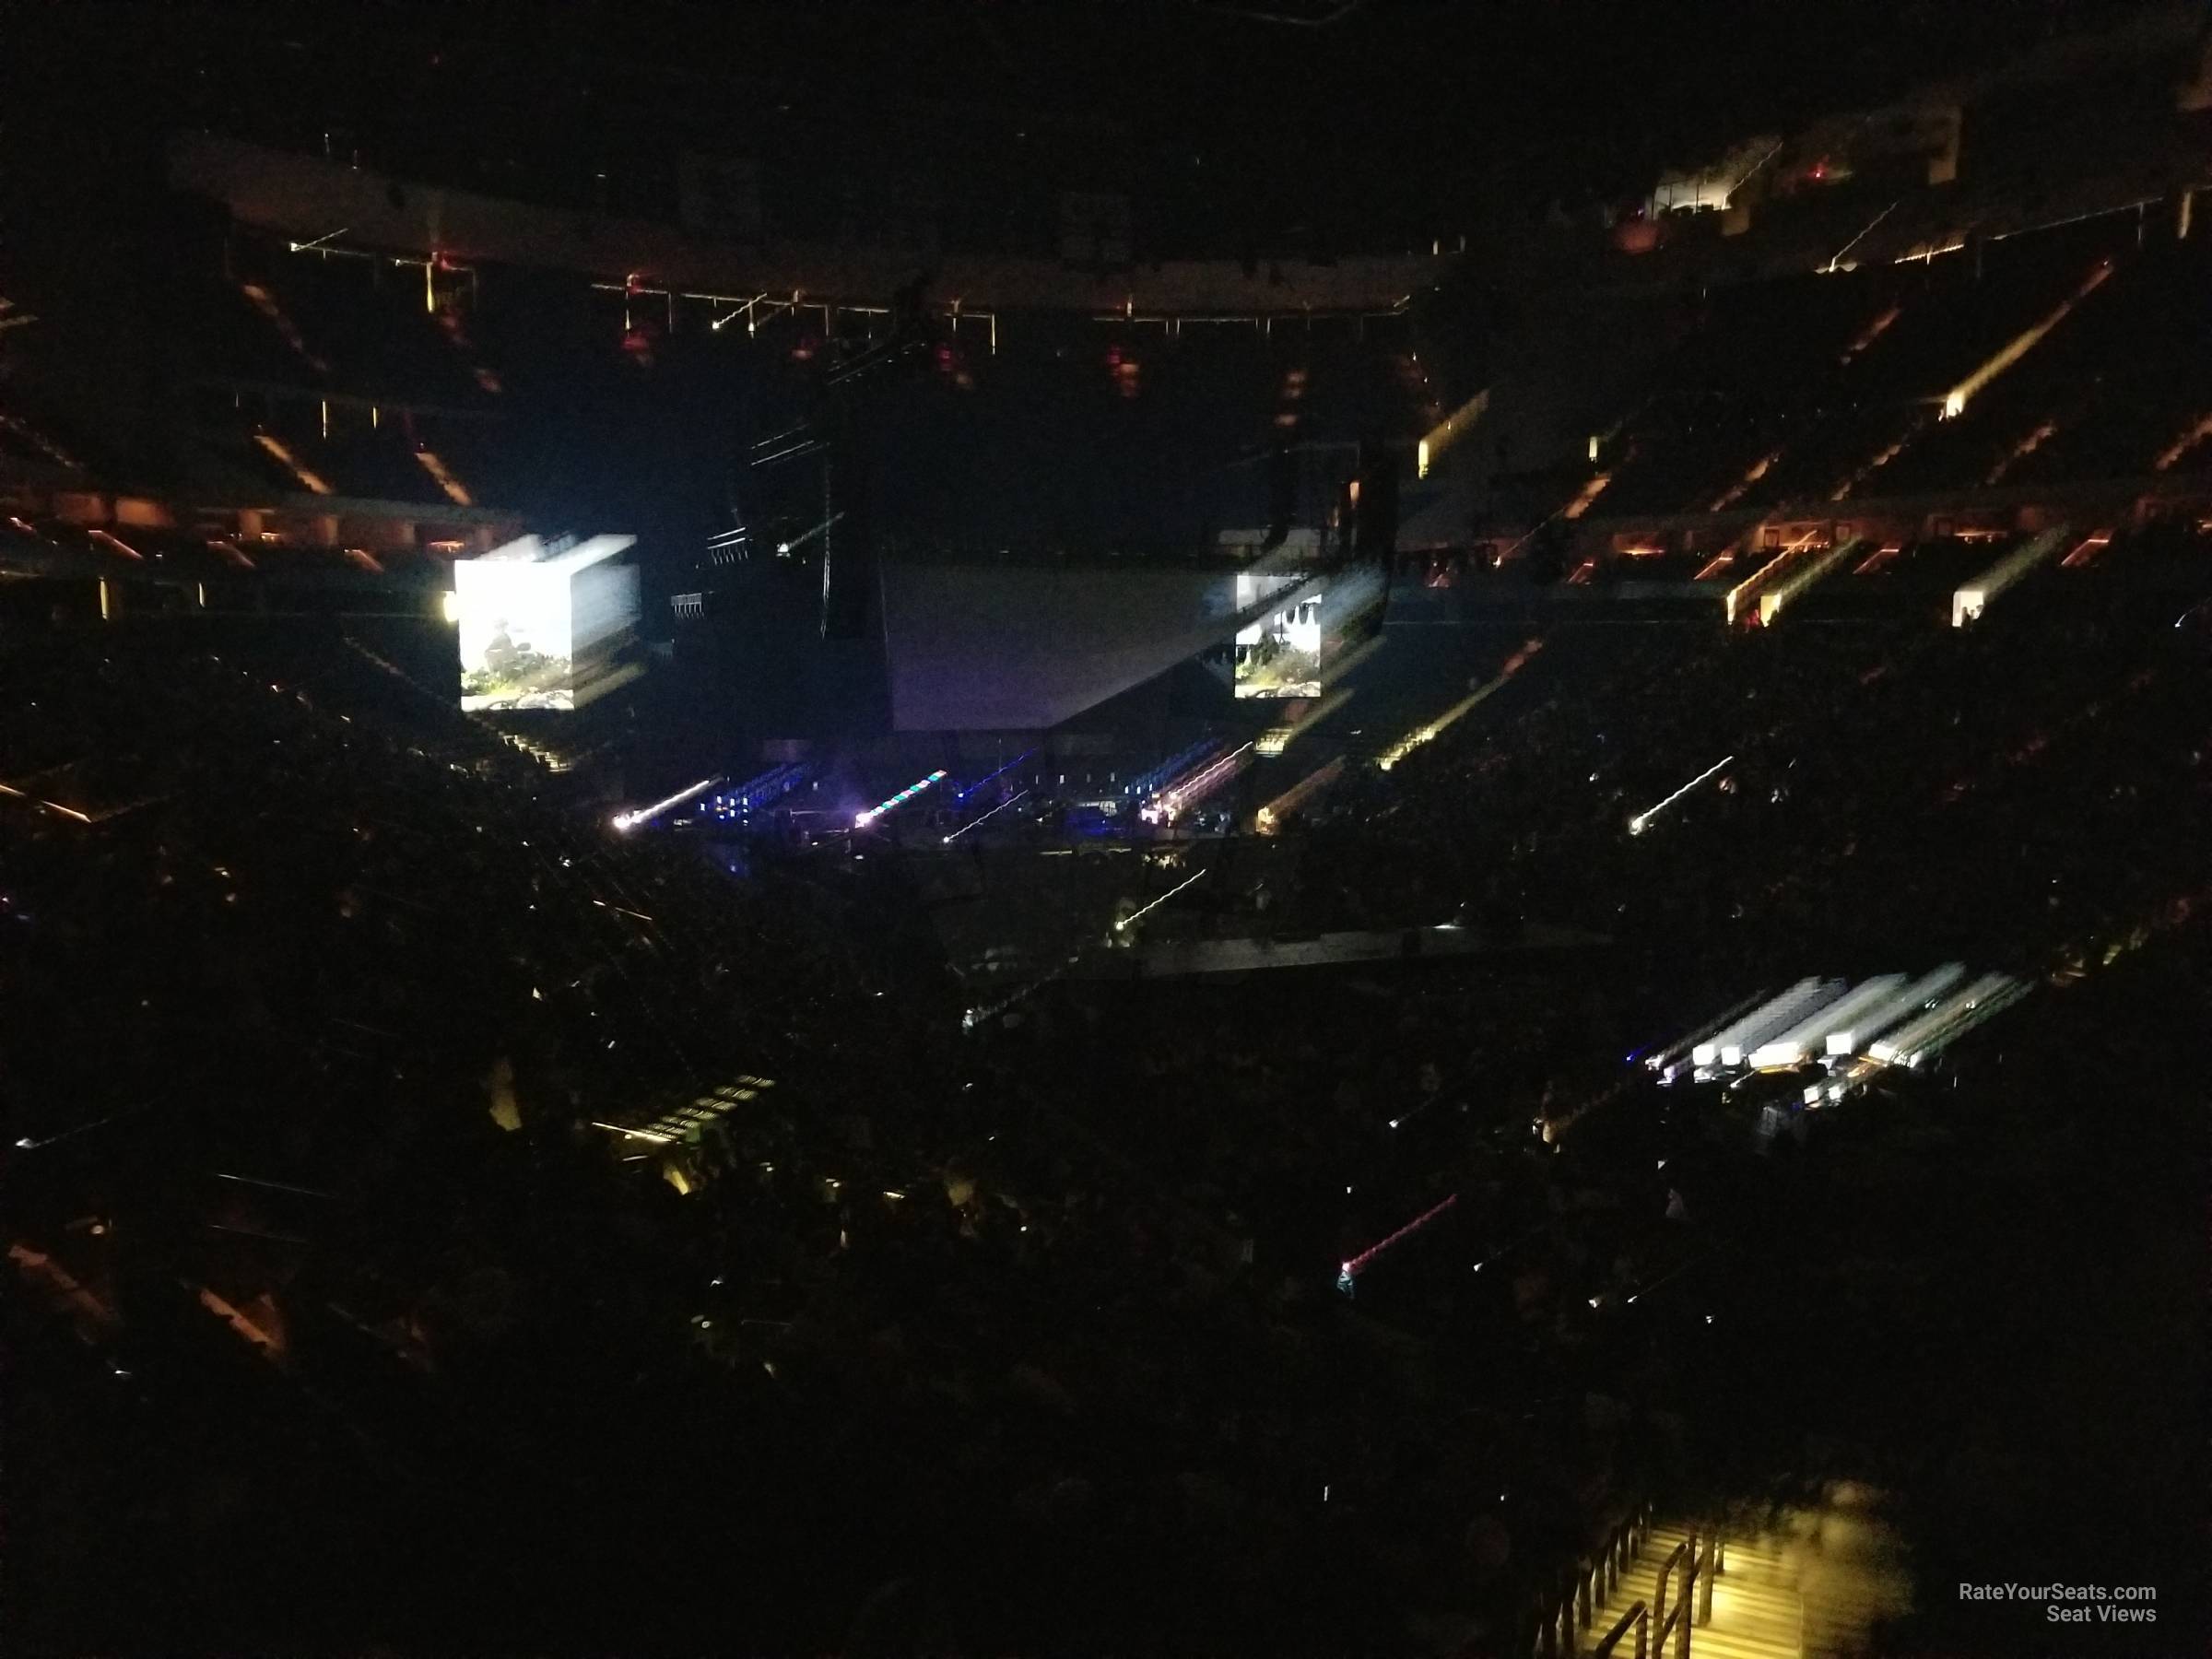 section 112, row 23 seat view  for concert - xcel energy center